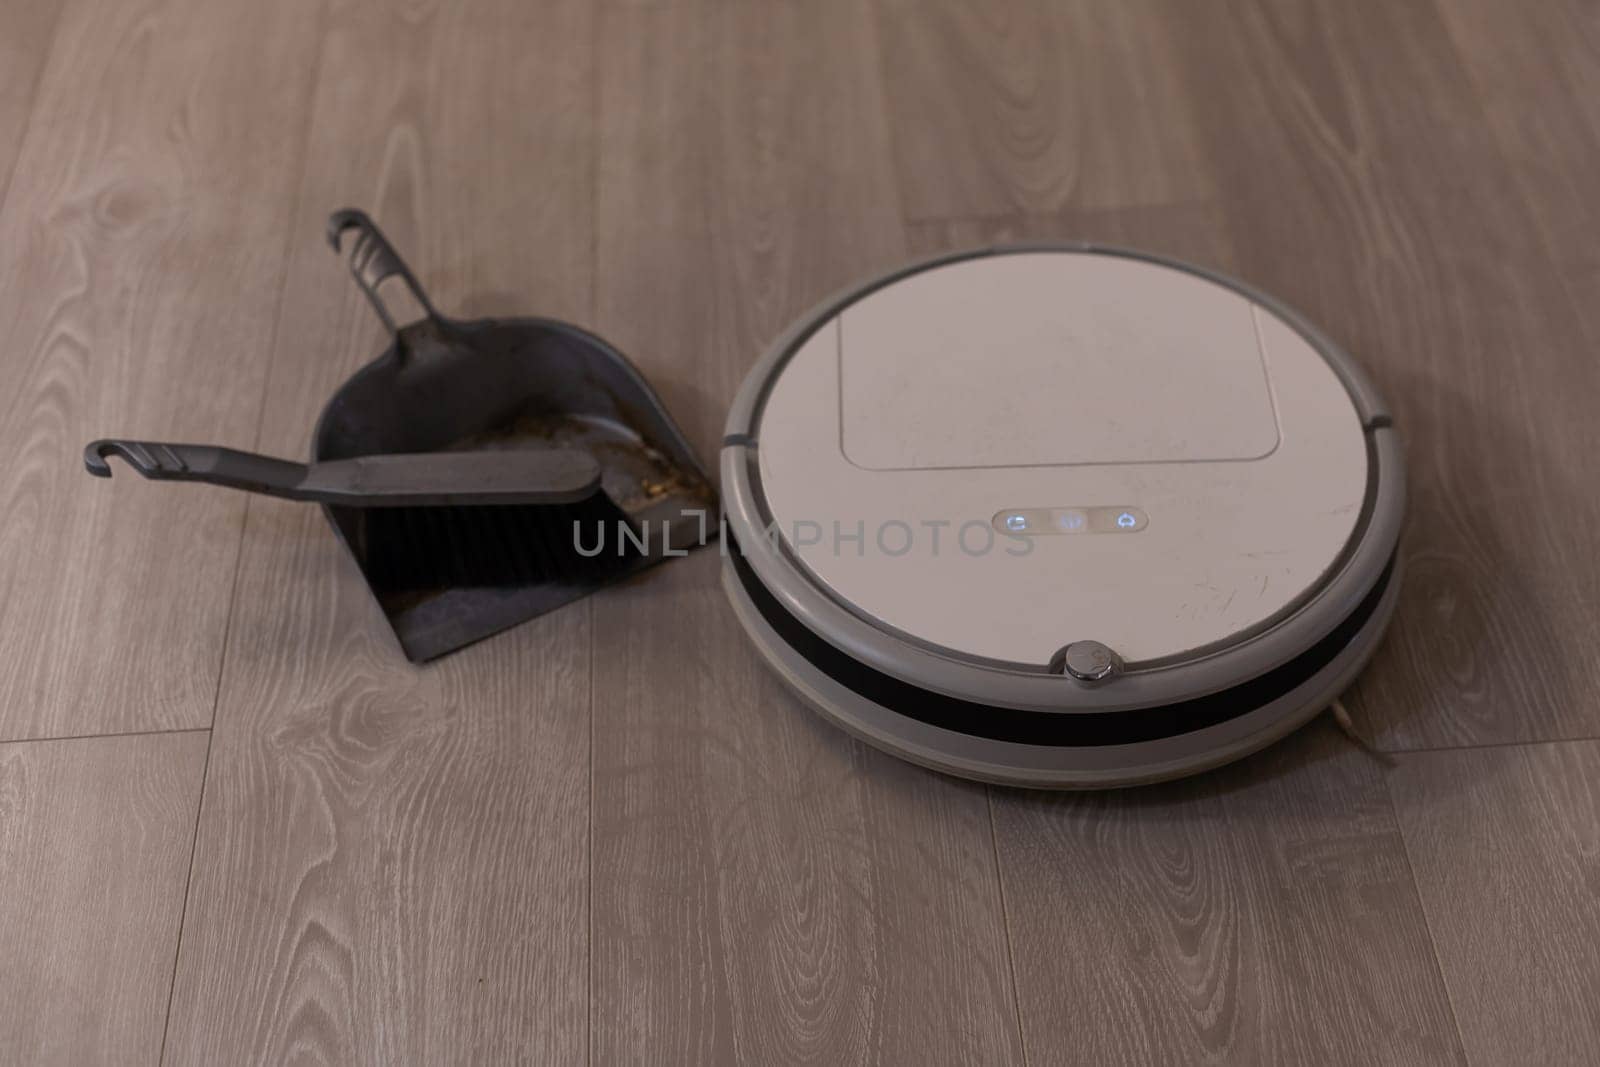 robotic vacuum cleaner on laminate wood floor smart cleaning technology. High quality photo